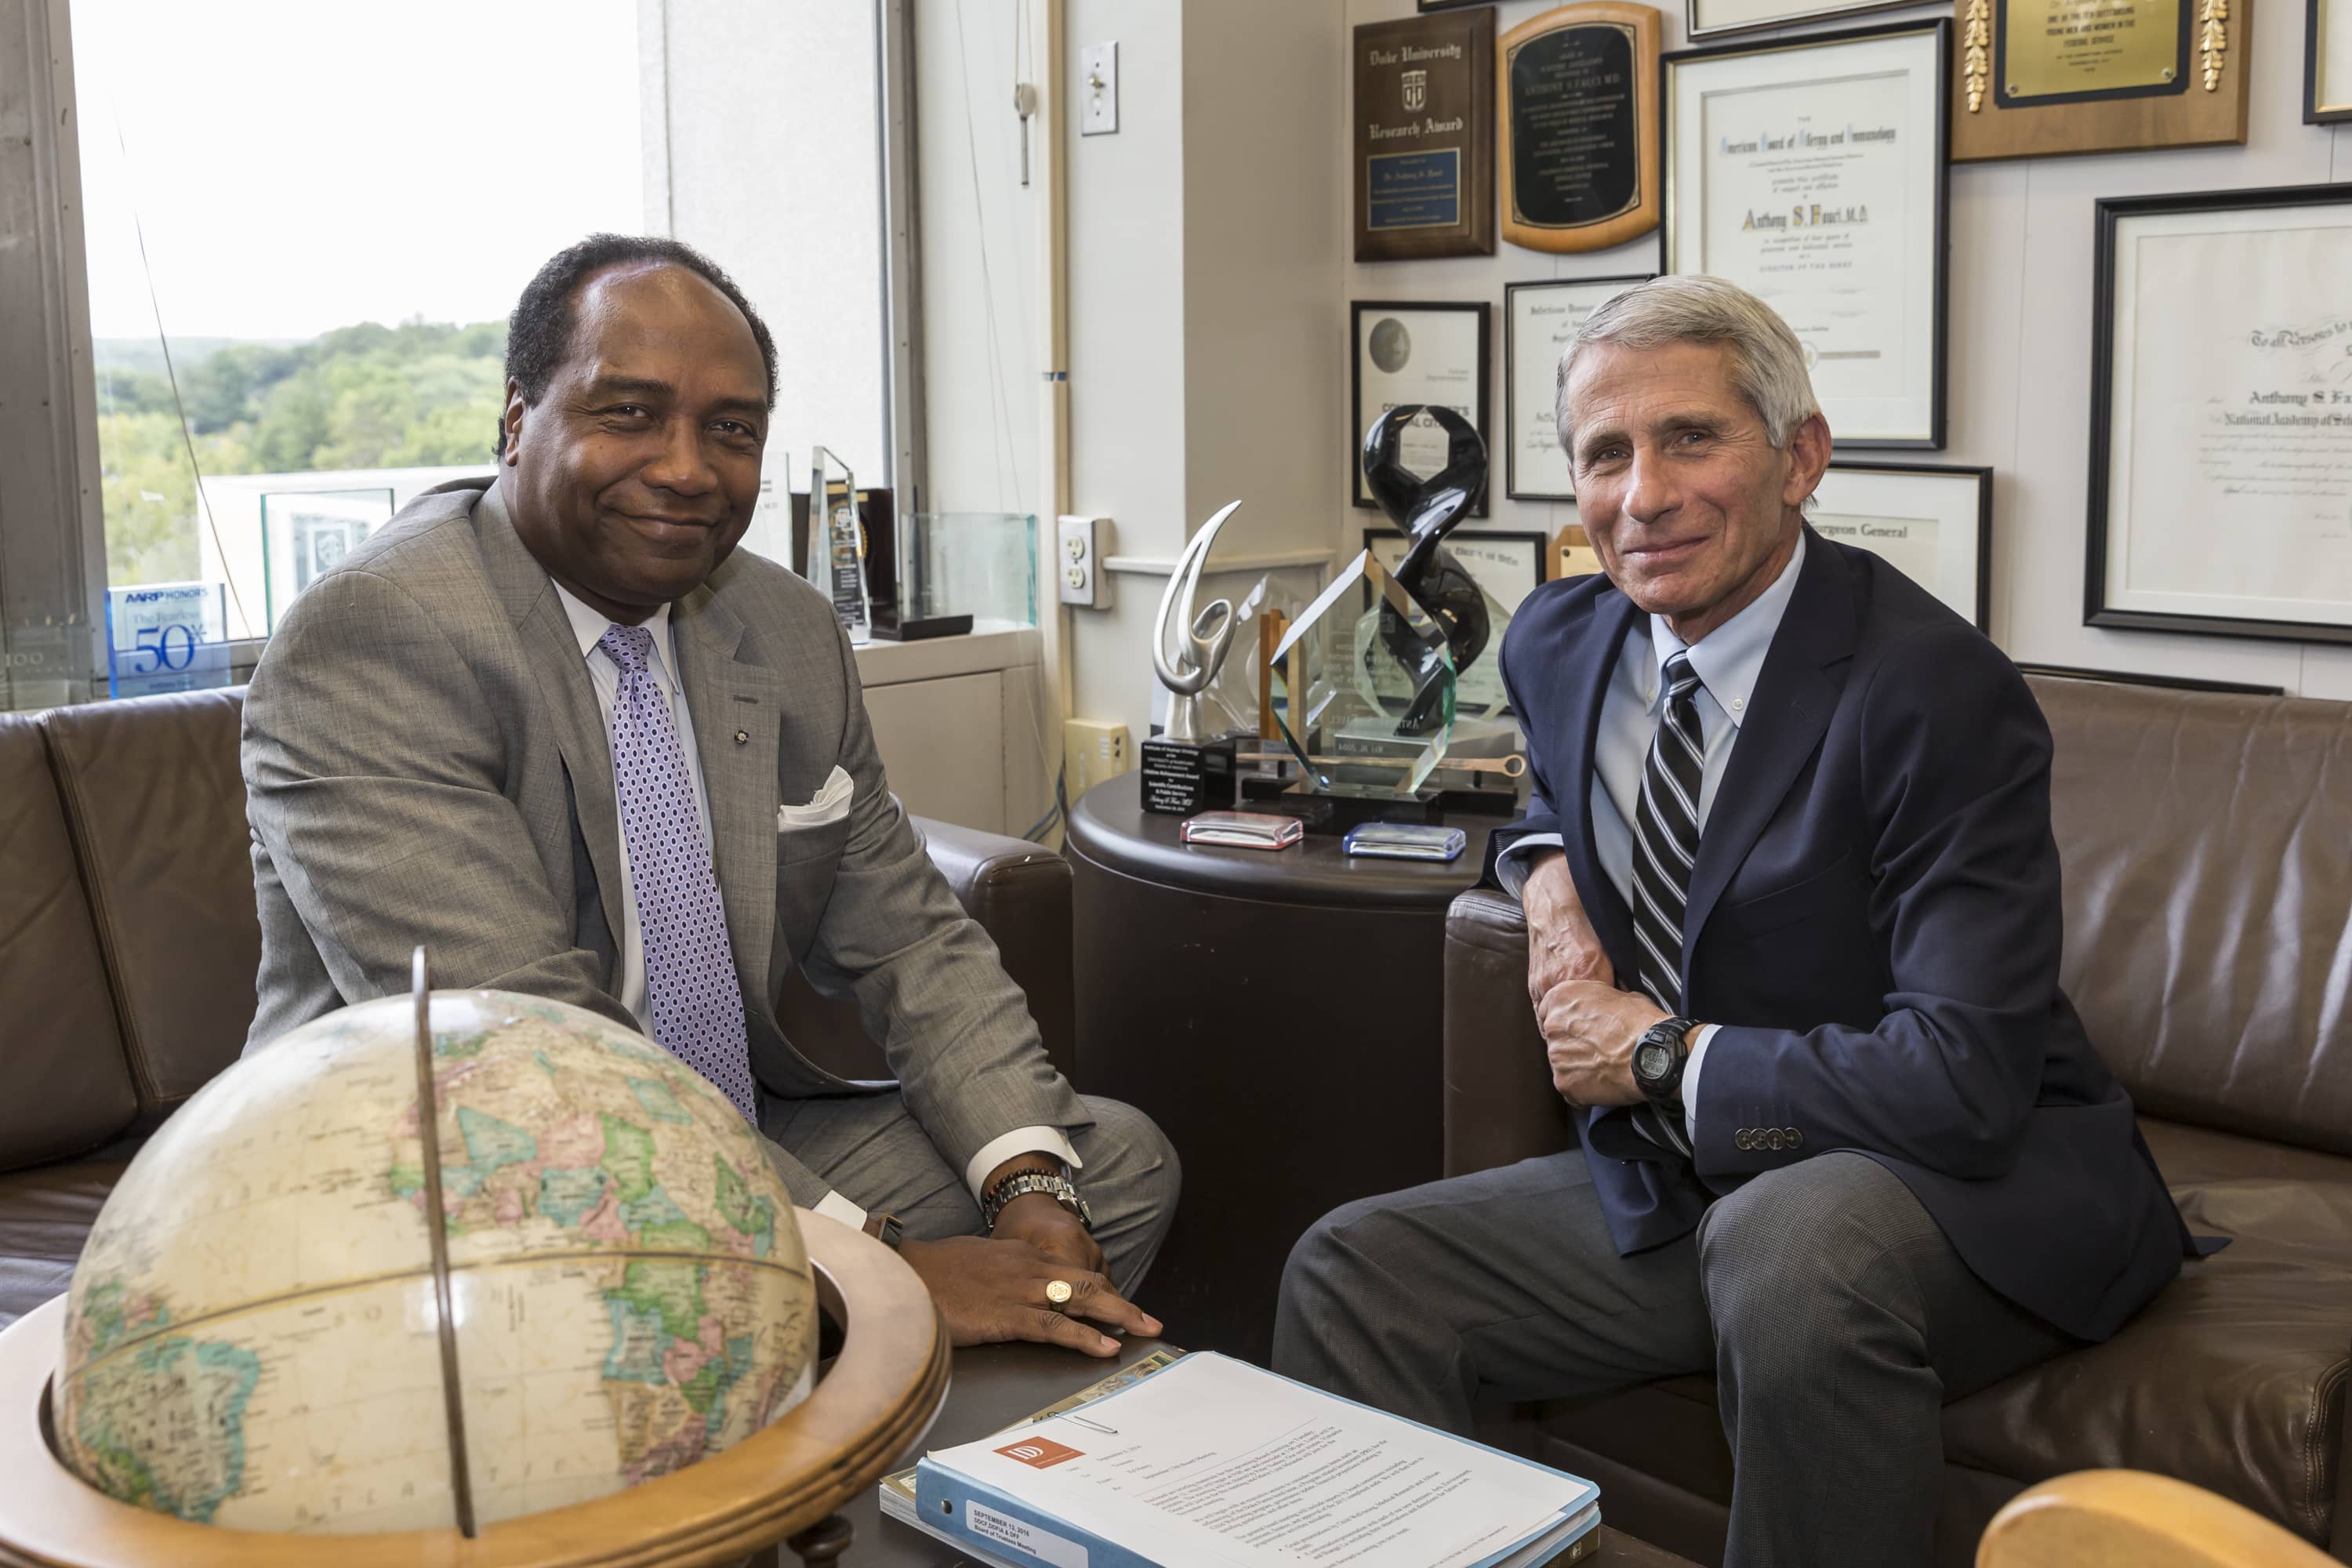 Drs. Rodgers and Fauci sitting in an office.